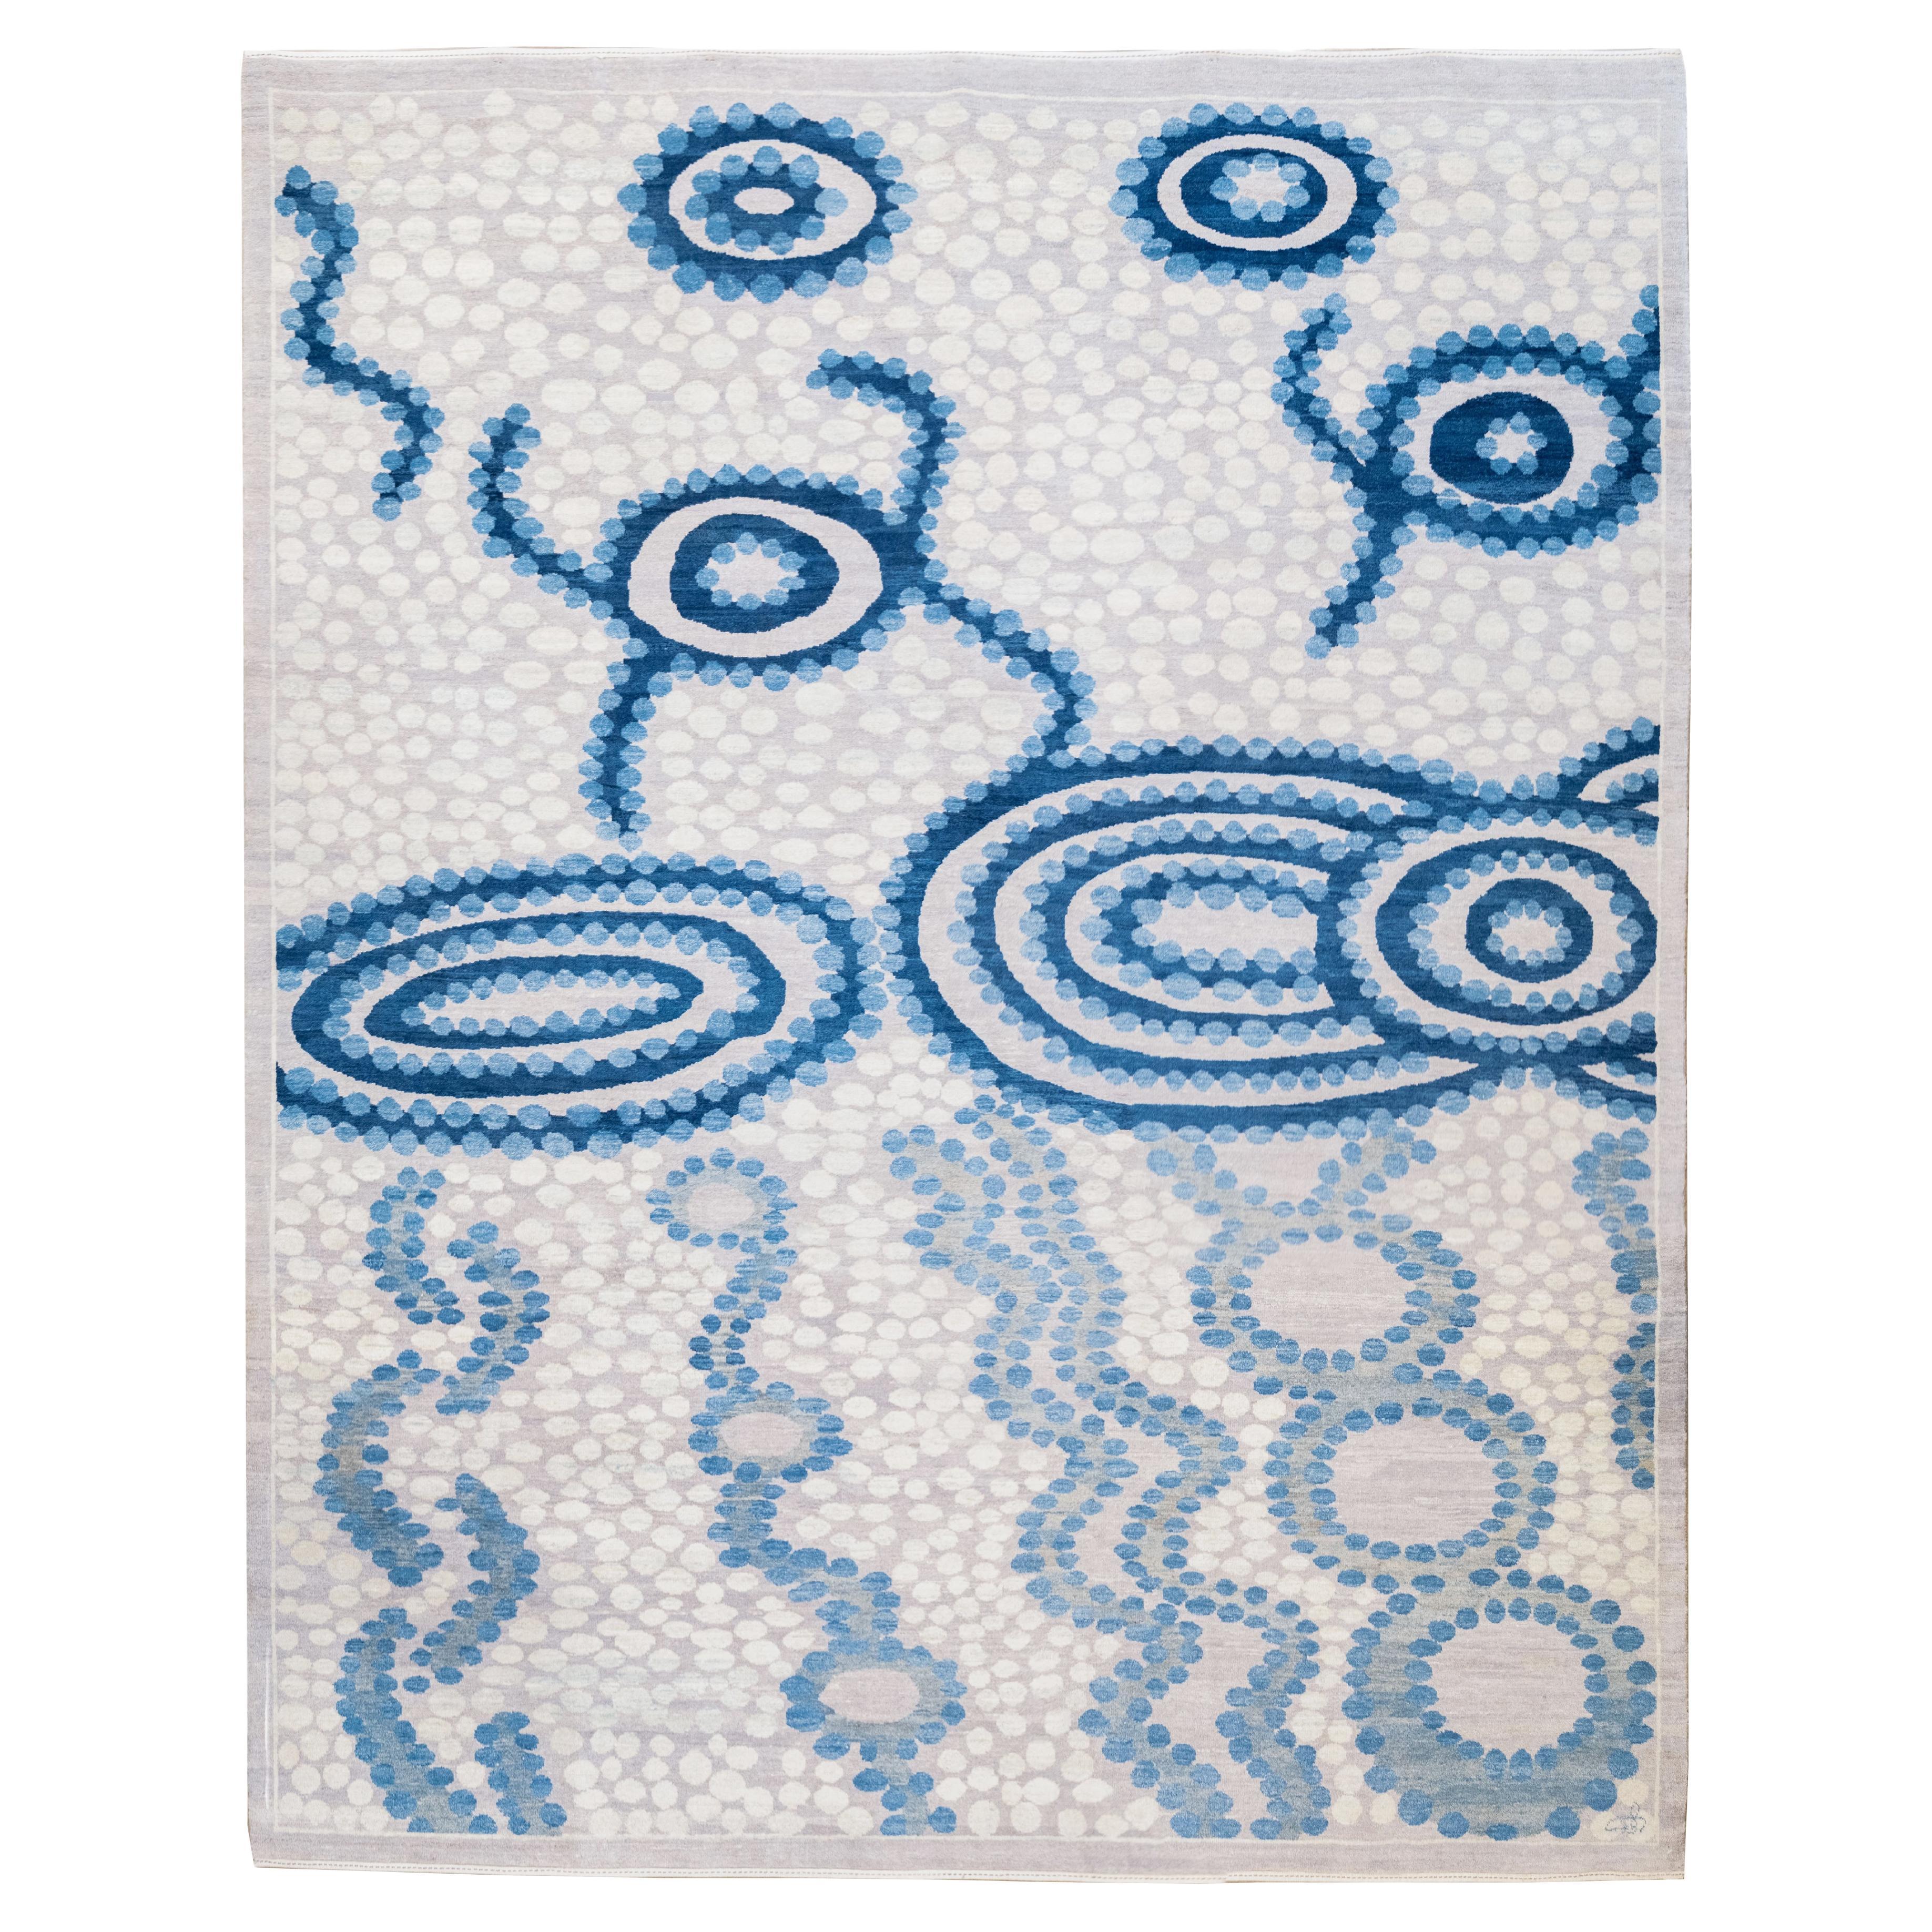 Blue and Cream Wool Contemporary Persian Carpet, Hand-Knotted, 8' x 10'